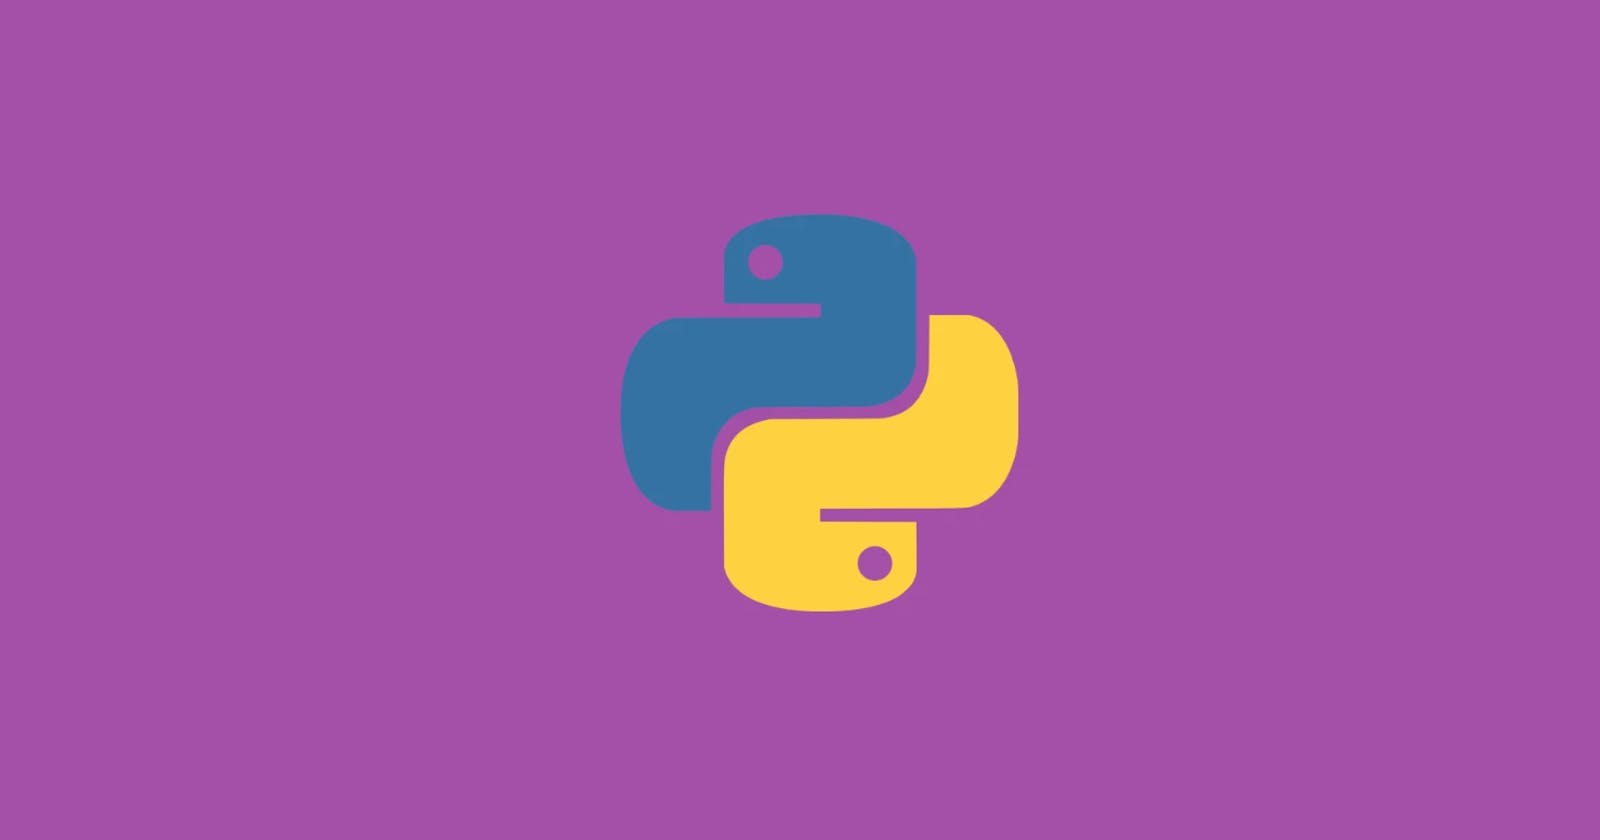 How to get a relative path in Python